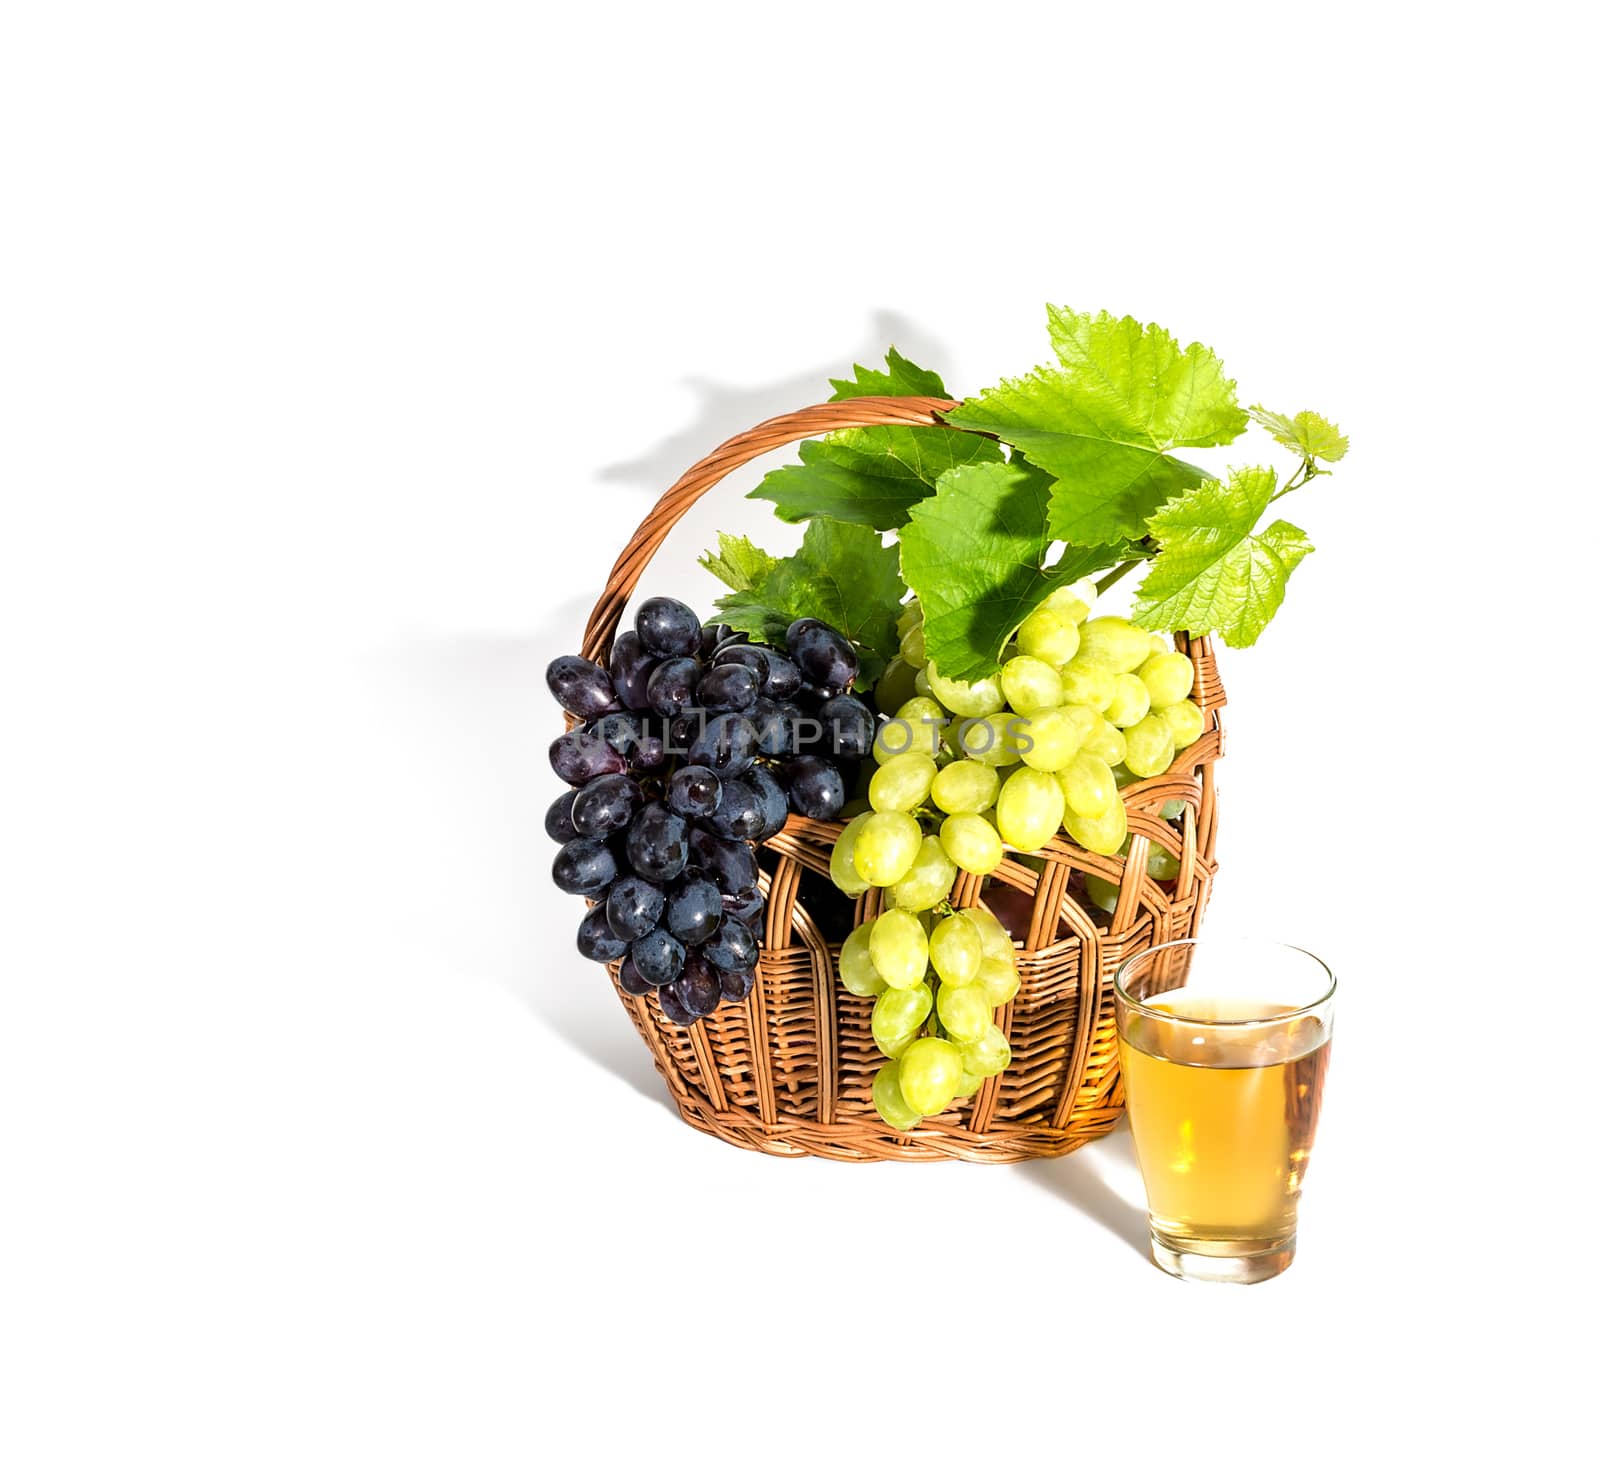 Grape with leaves and grape juice isolated on white. With clipping path. Full depth of field.